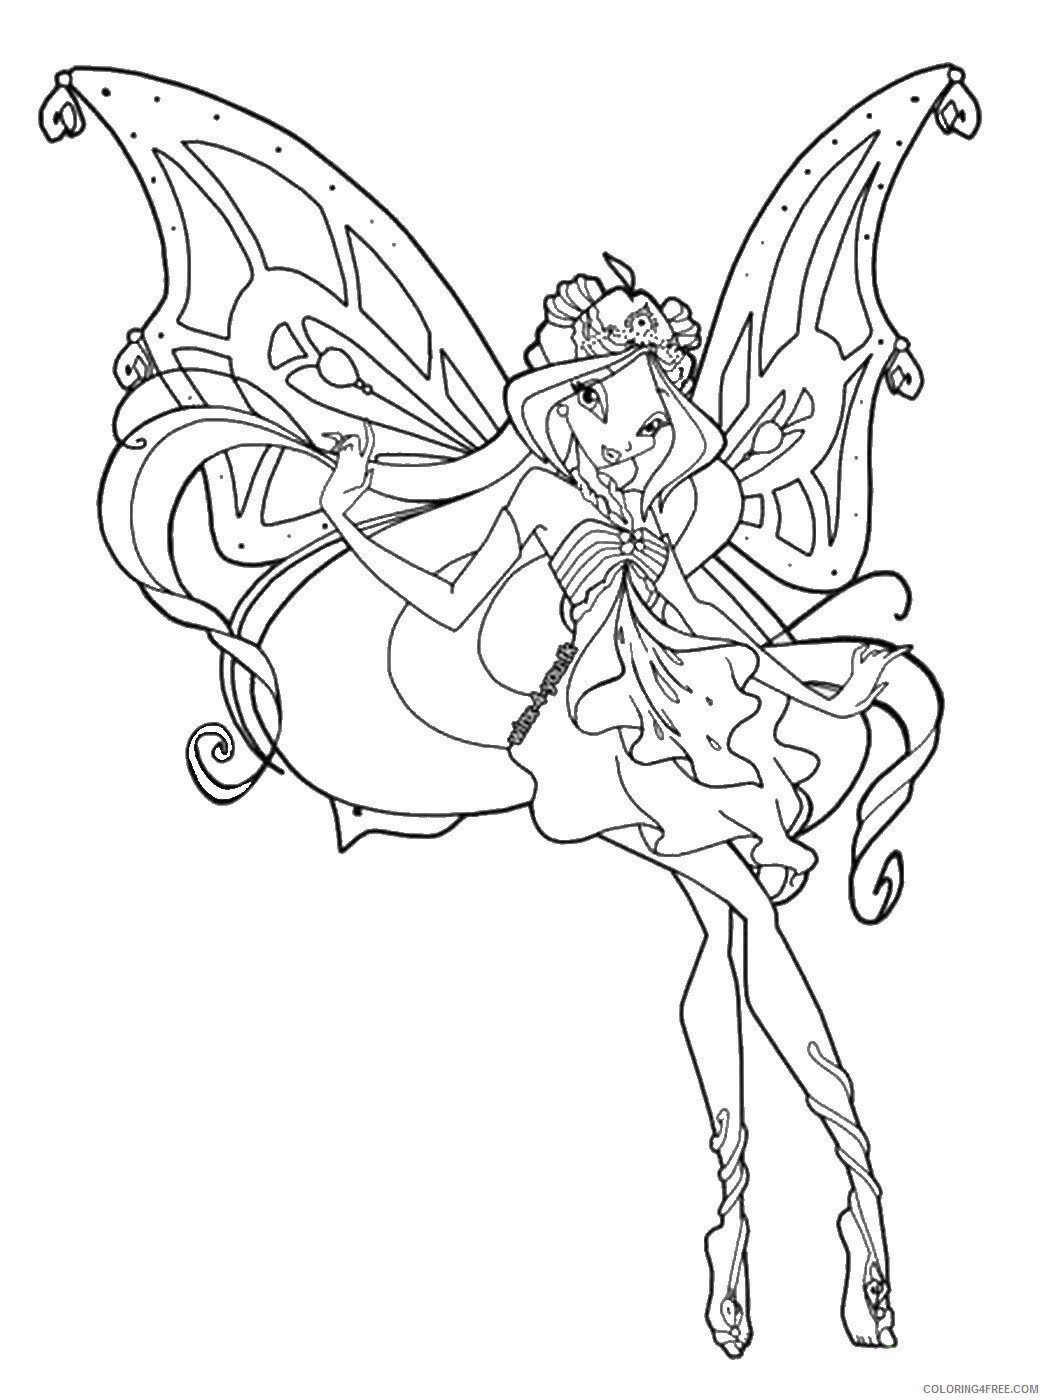 Winx Coloring Pages TV Film winx_cl_20 Printable 2020 11382 Coloring4free